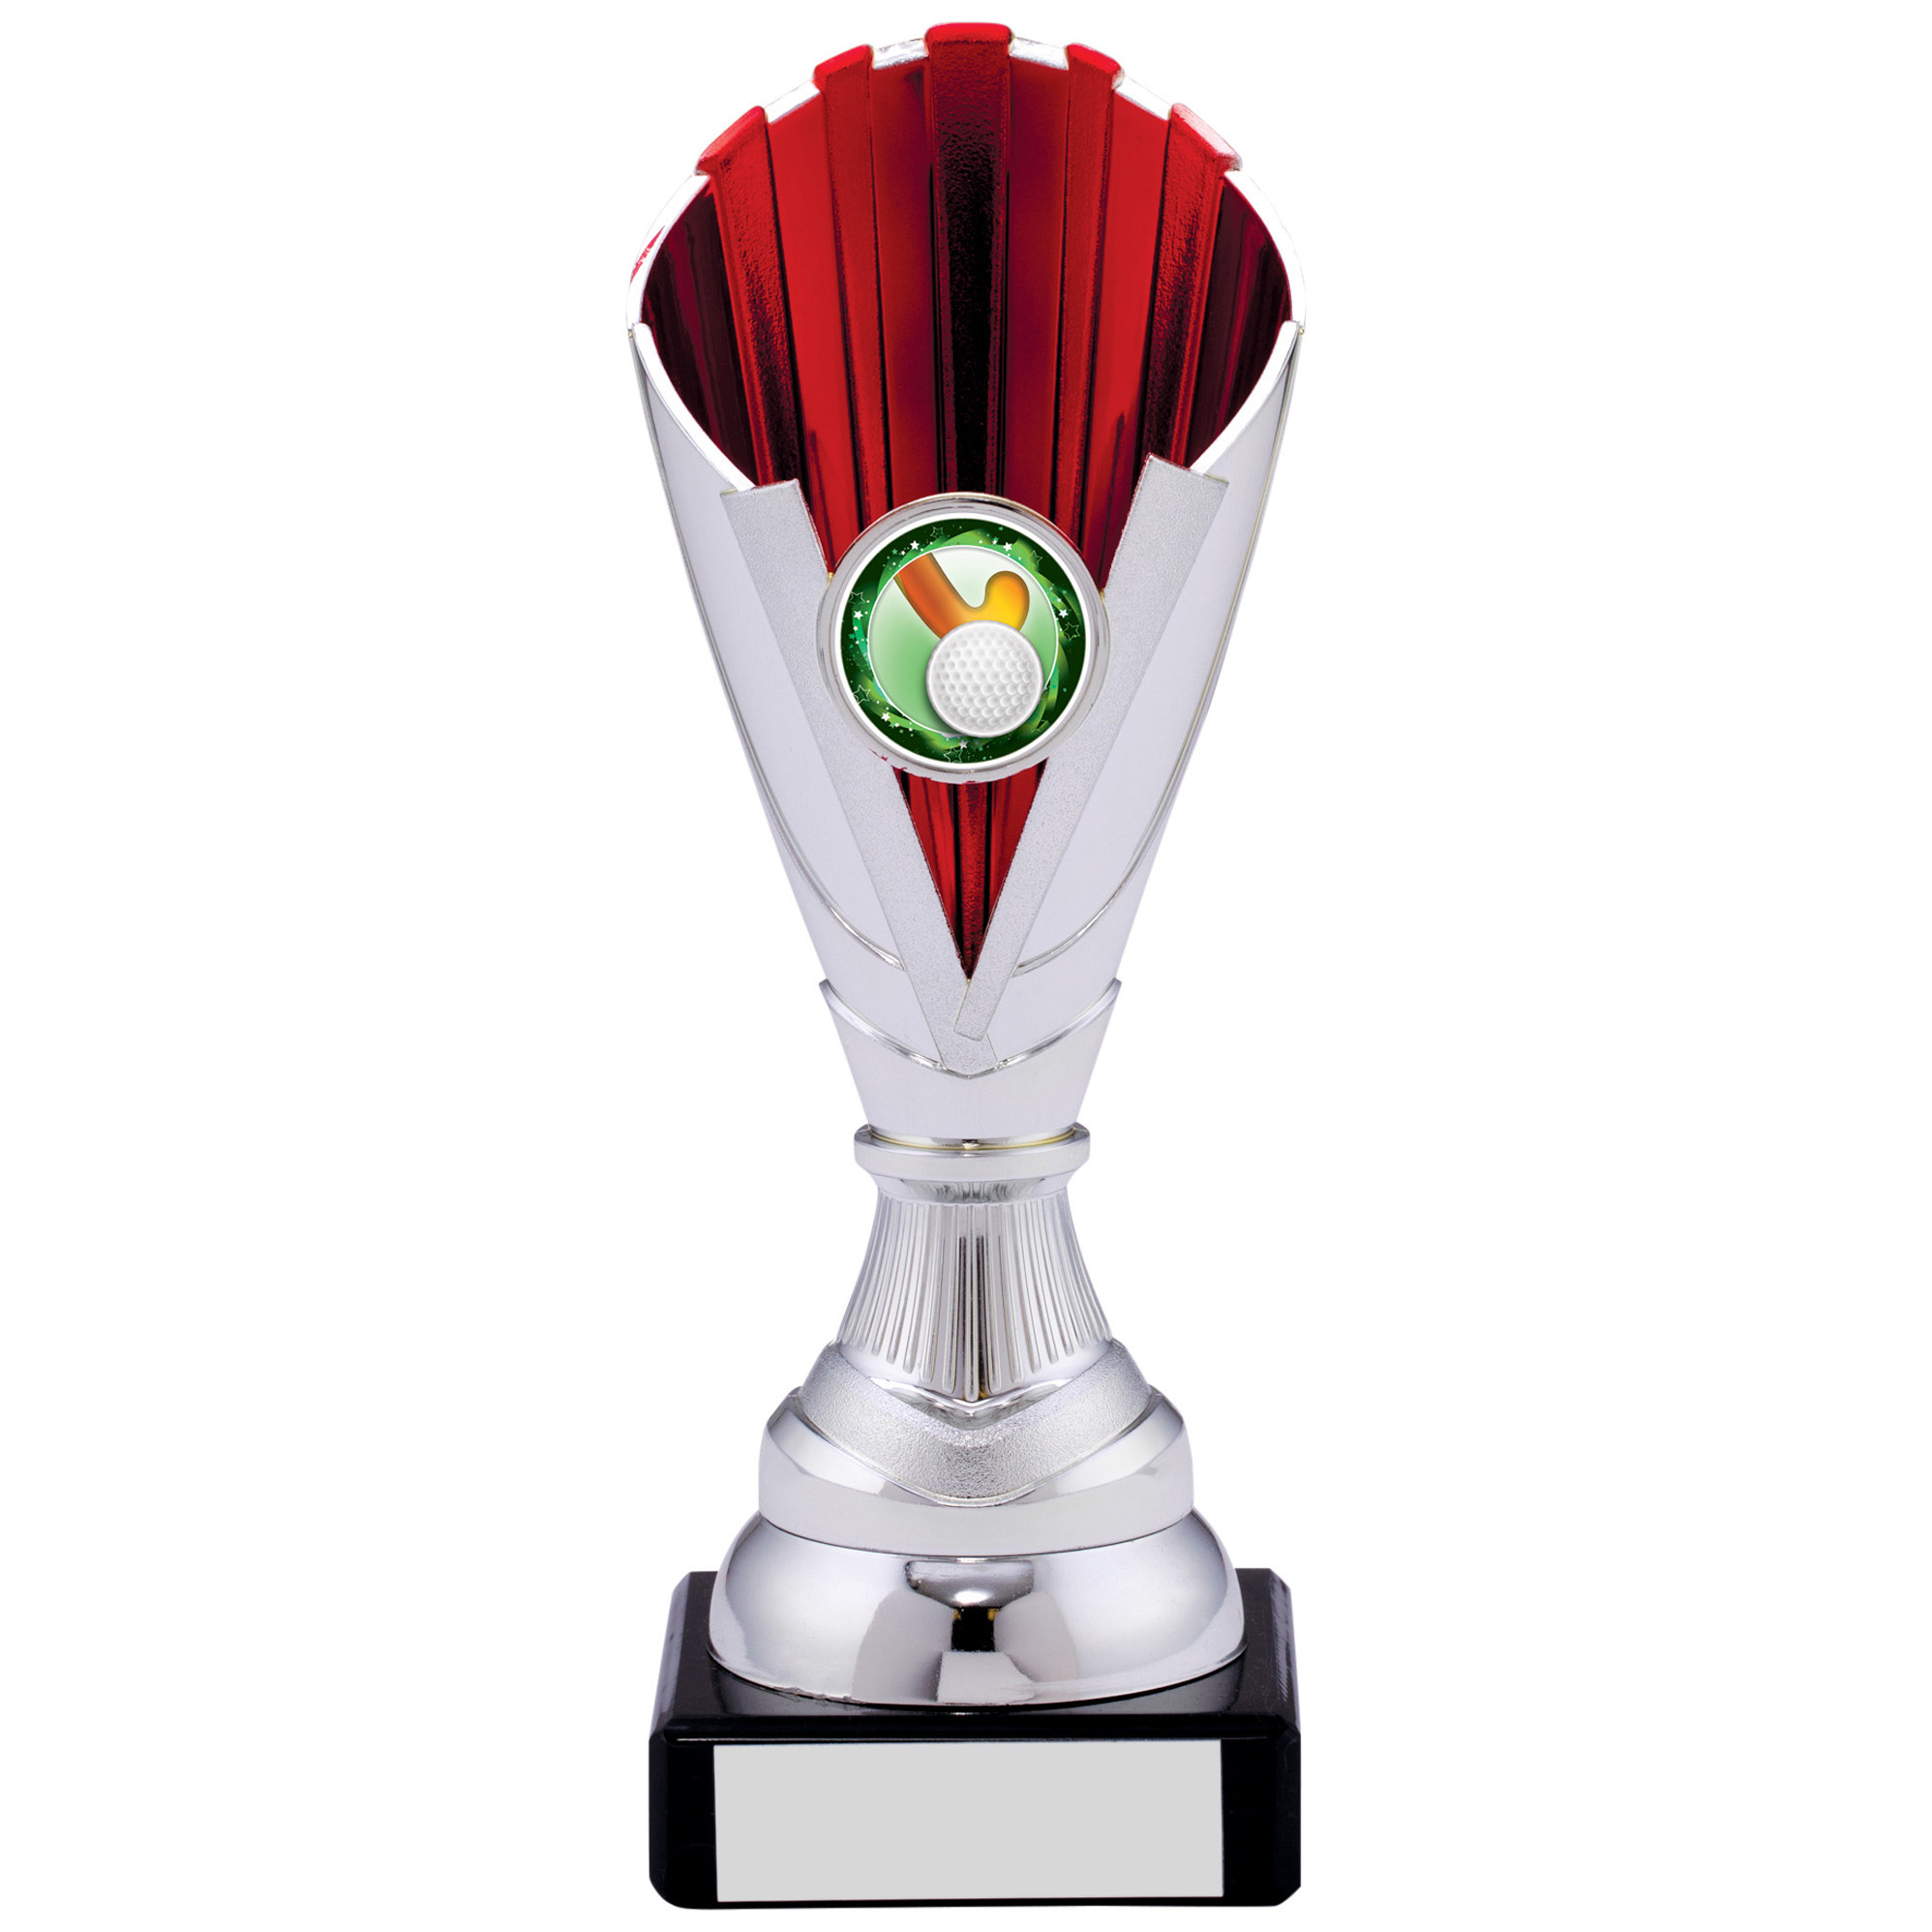 SILVER RED TROPHY